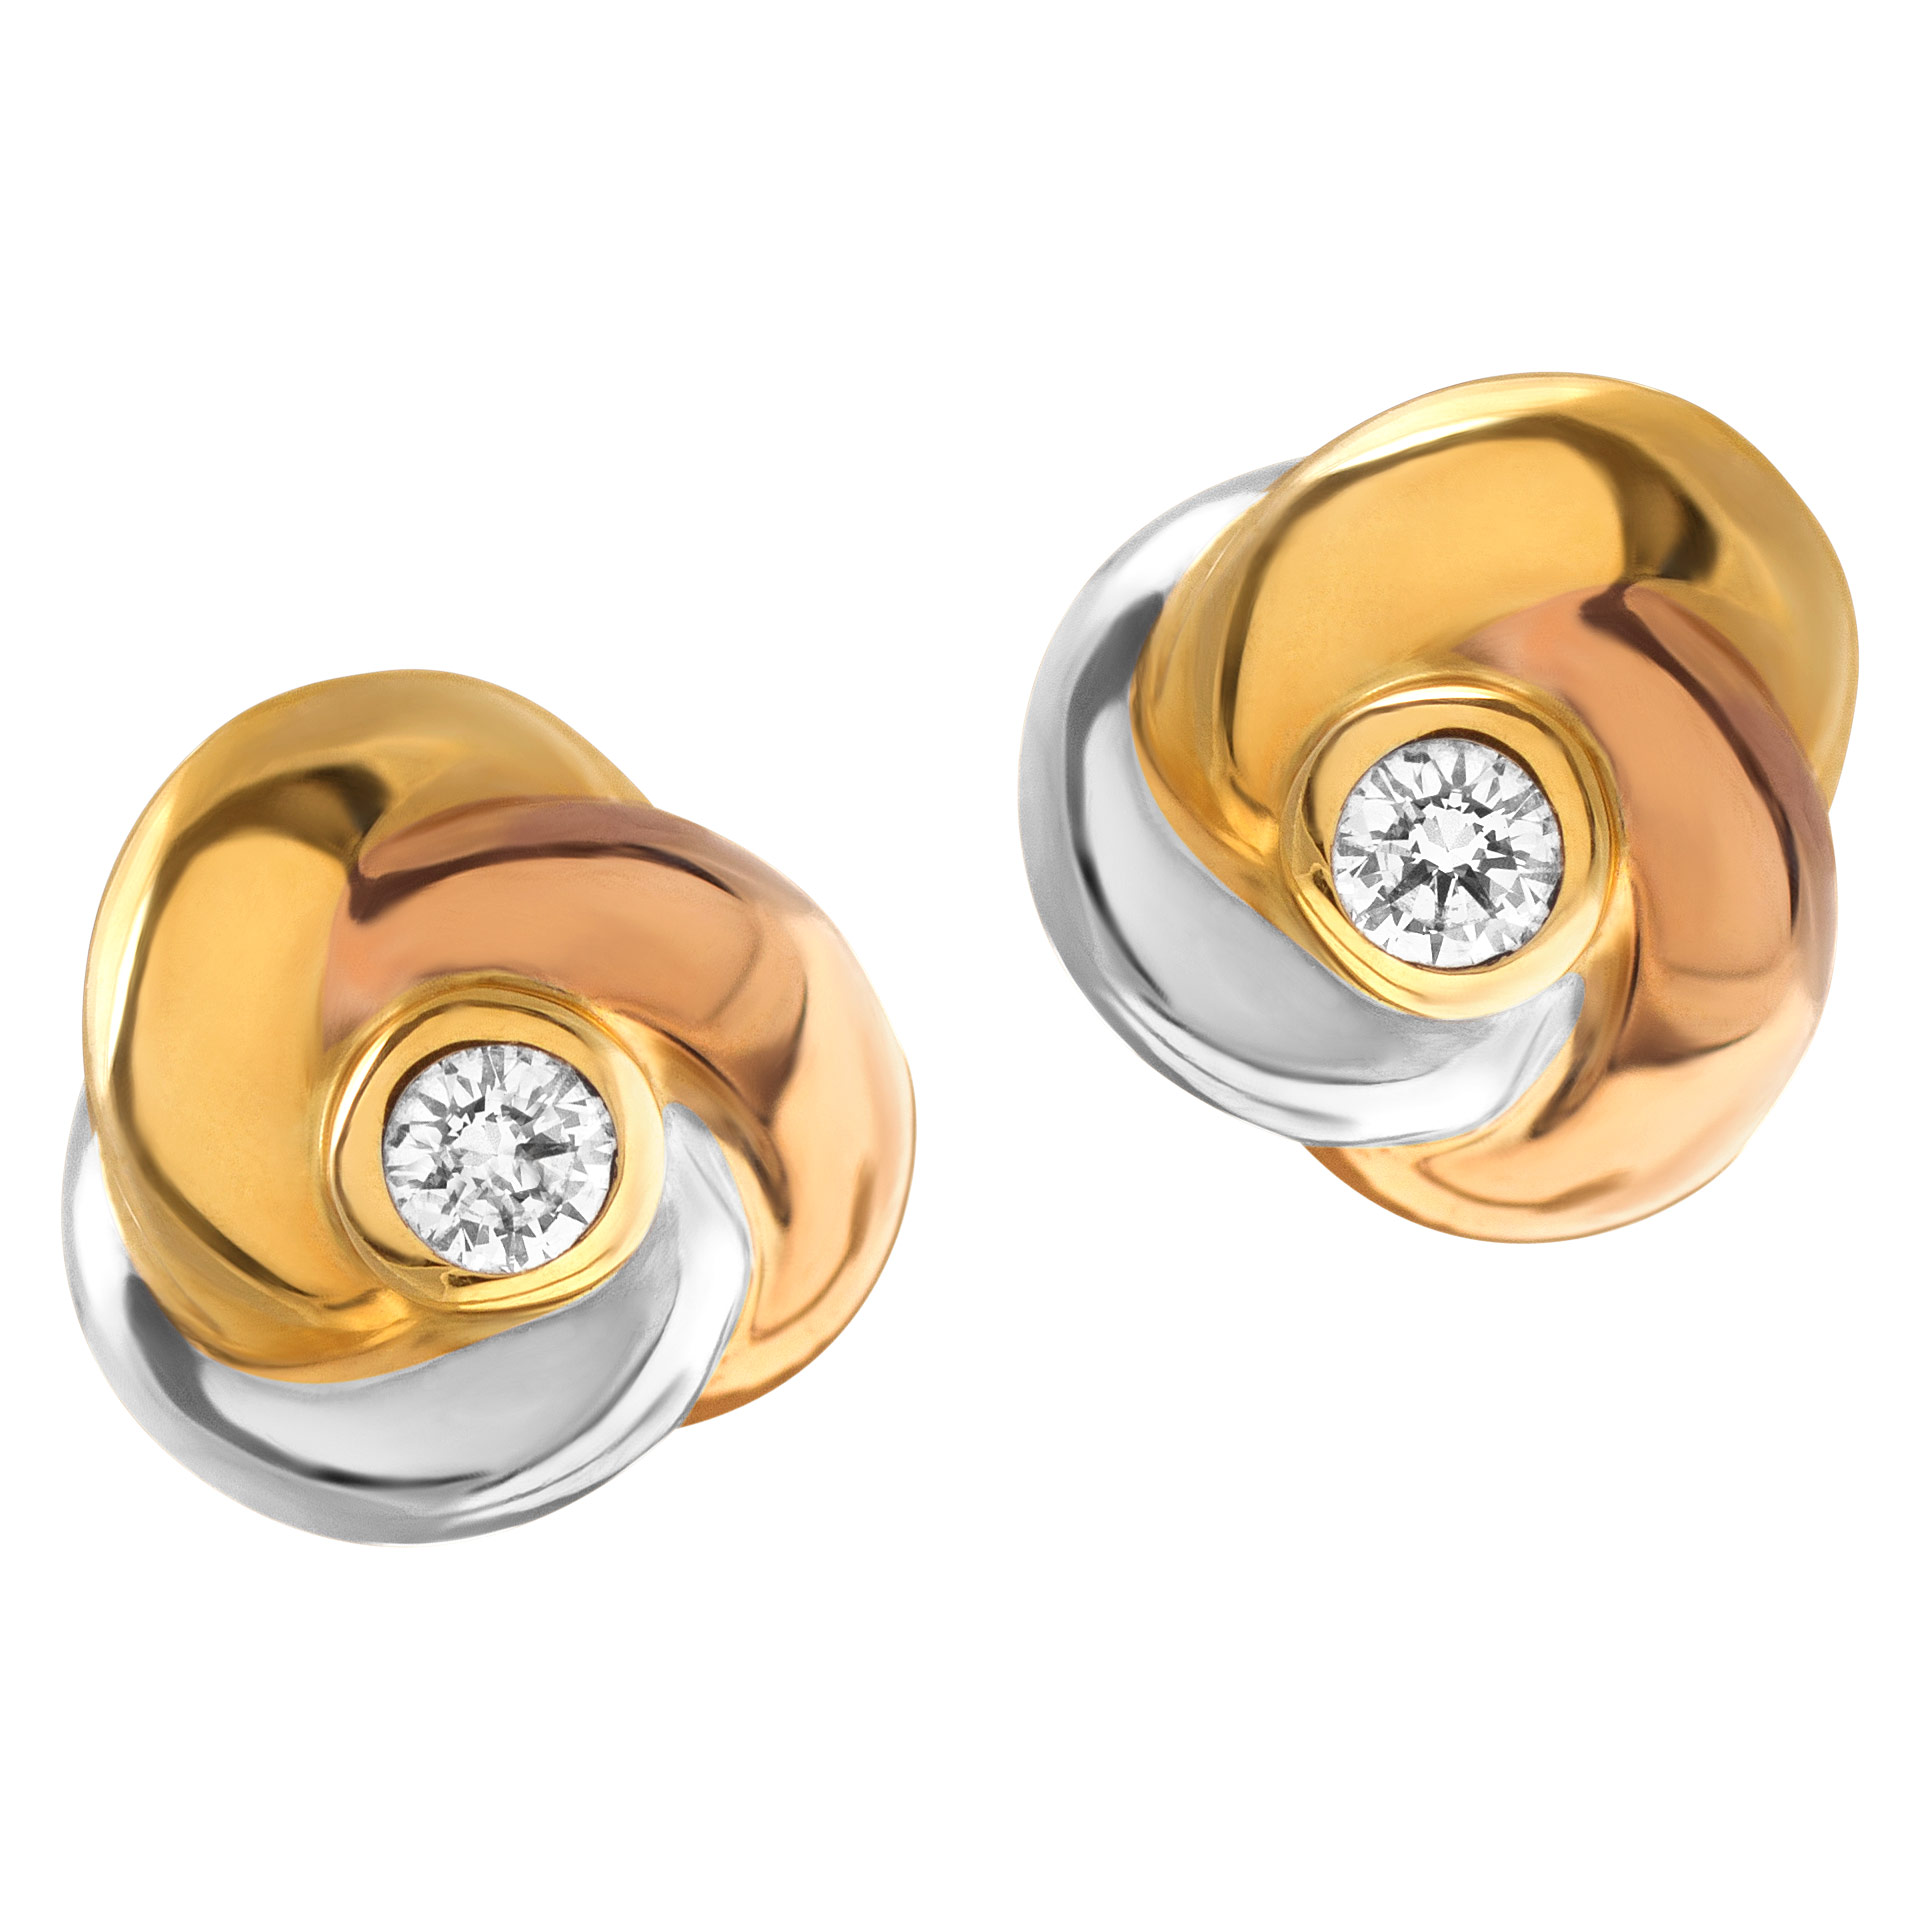 Cartier Trinity Earrings in 18k yellow white and rose gold with diamond centers